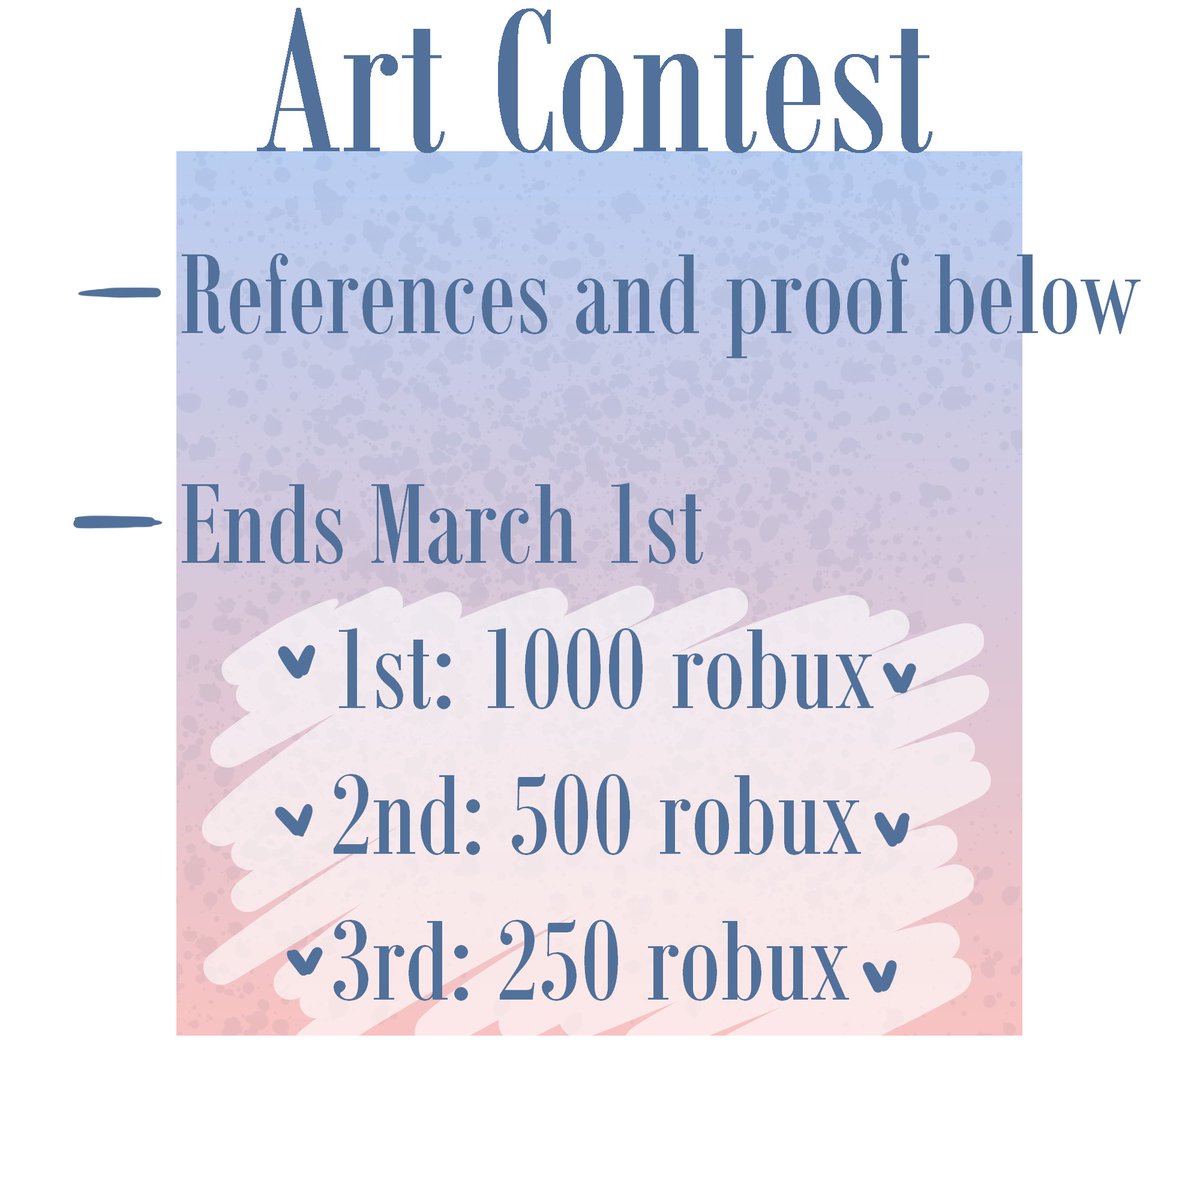 Emmaaaa On Twitter Art Contest Use Emmabwac Ends March 1st 1st 1000 Robux 2nd 500 Robux 3rd 250 Robux You Can Make Up To 2 Entries More References Below Rts Are - 250 robux 2019